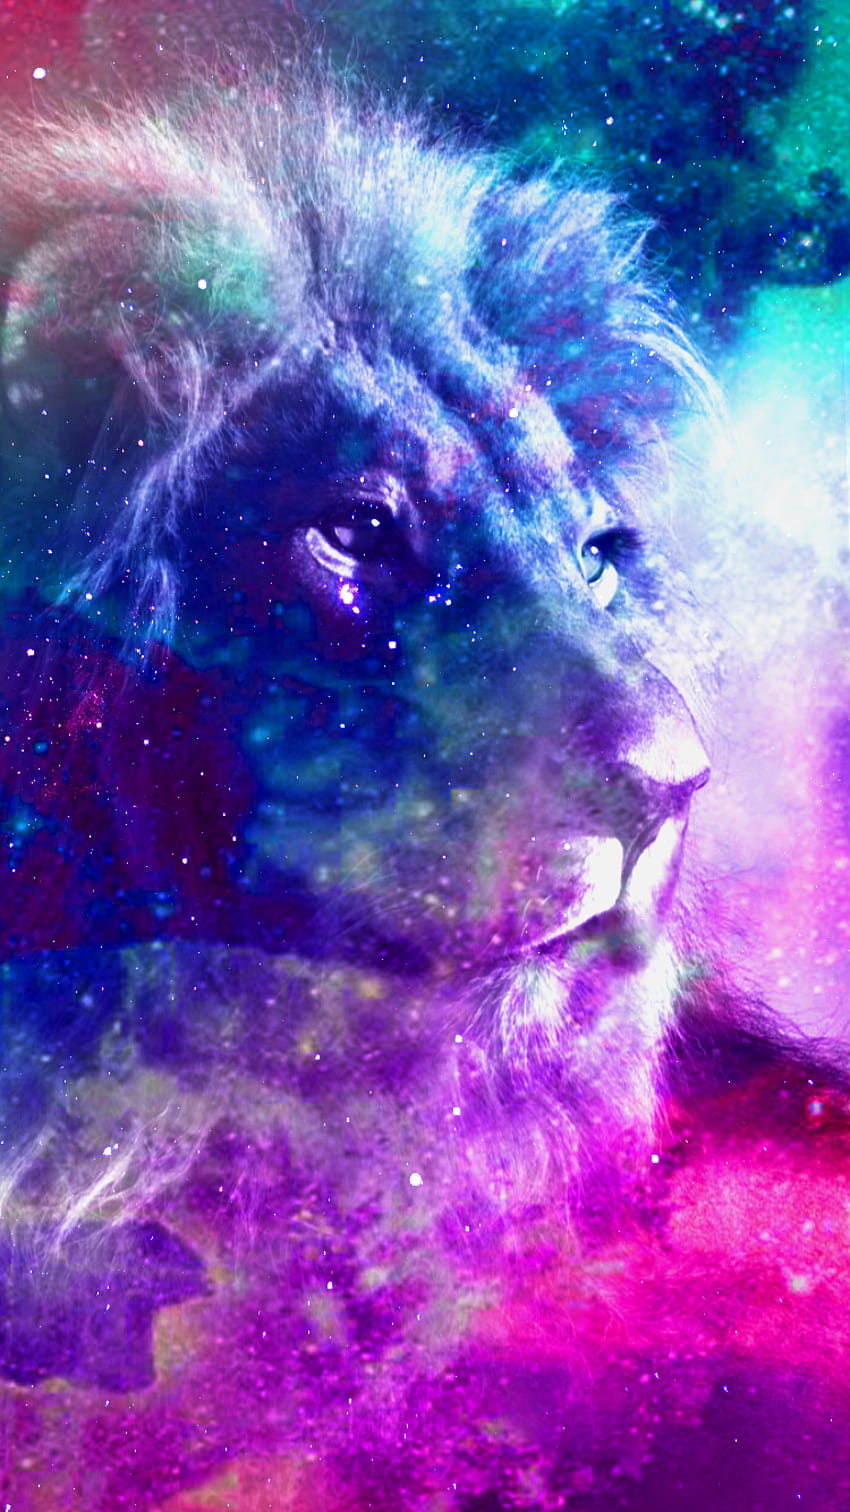 Galaxy Lion HD Wallpapers 1000 Free Galaxy Lion Wallpaper Images For All  Devices